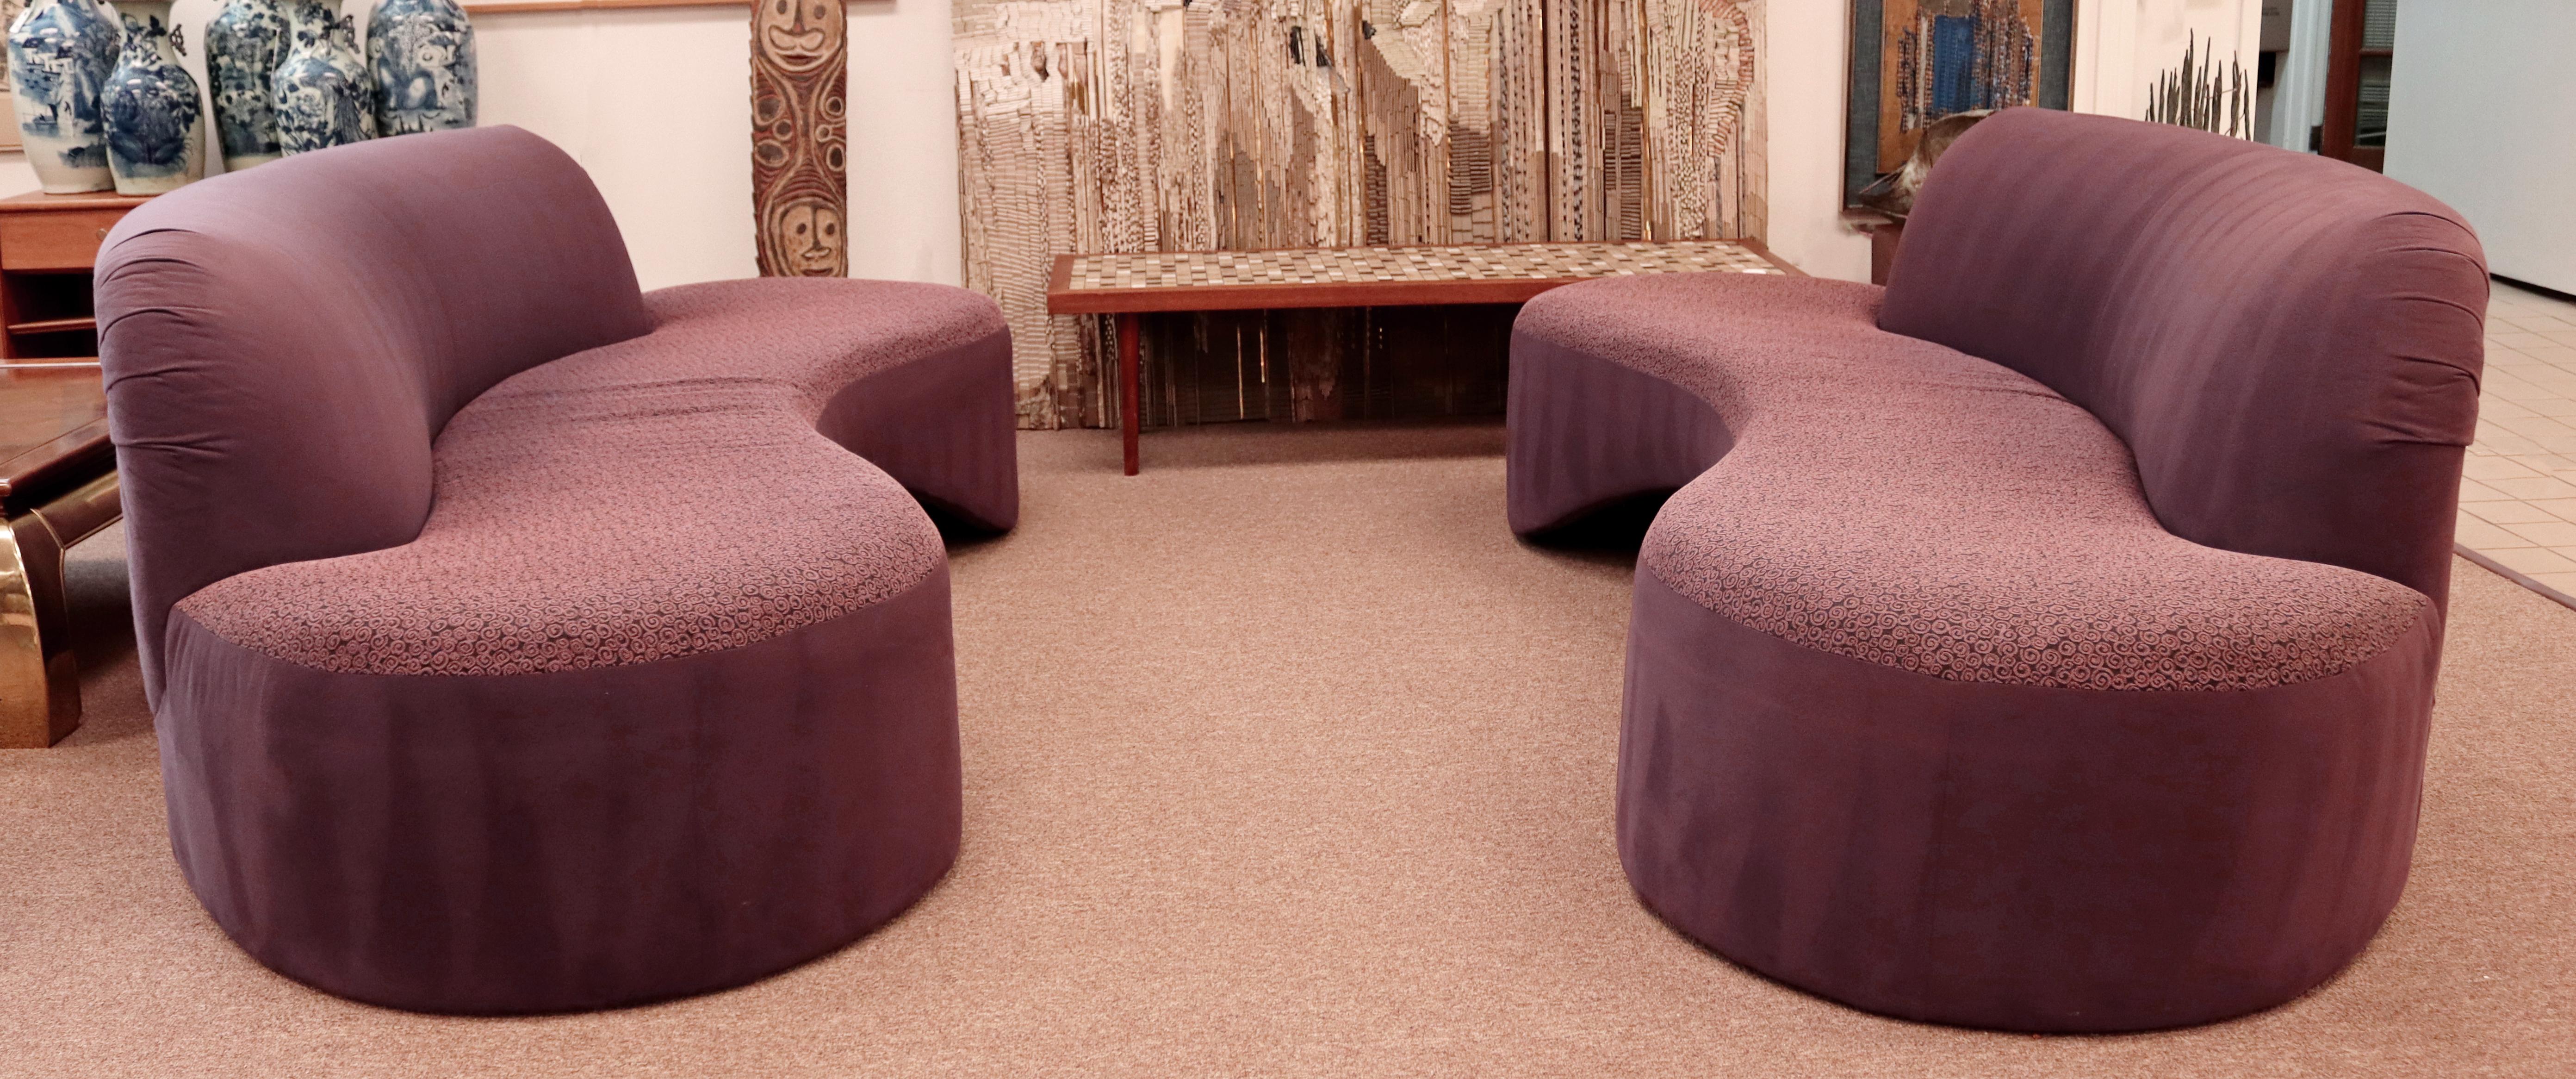 For your consideration is a breathtaking pair of curved, serpentine sofas, circa the 1980s. In excellent vintage condition. Because of lighting doesn't quite show the true color, these are purple. The dimensions of each are 94